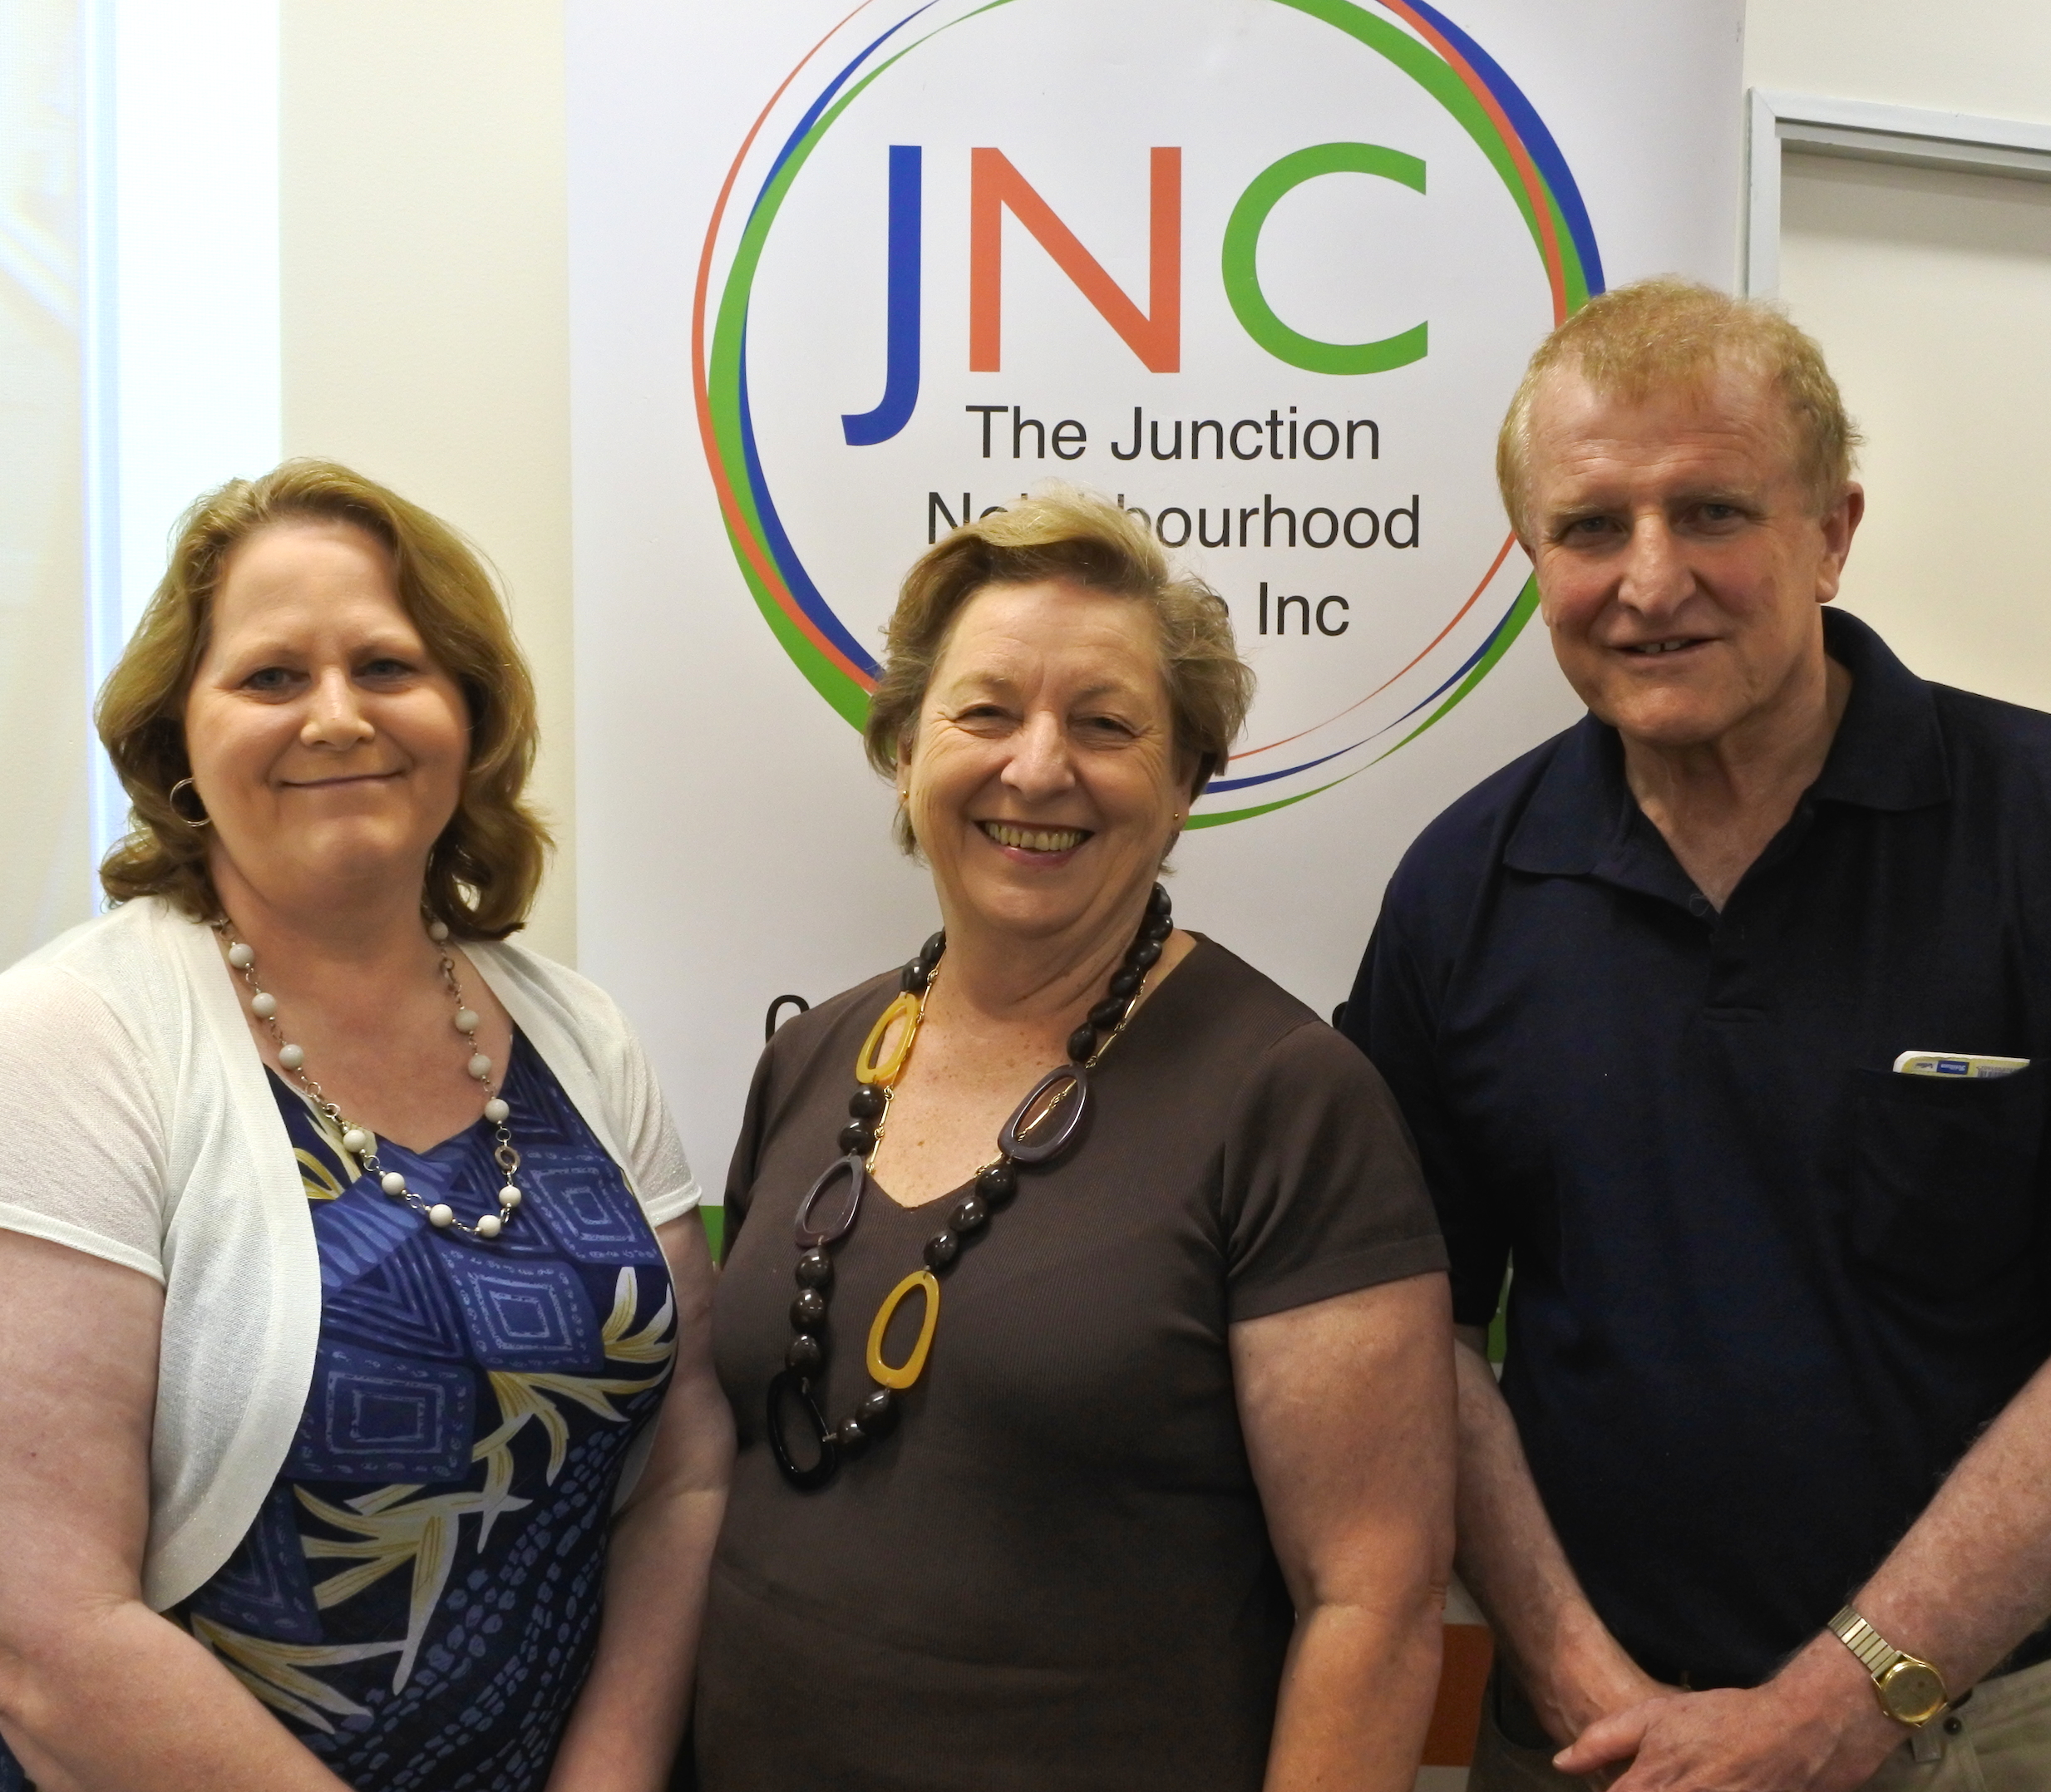 Members of the JNC Management Committee Vicki Johnston (L) and Bob Davidson, with Faye Williams.